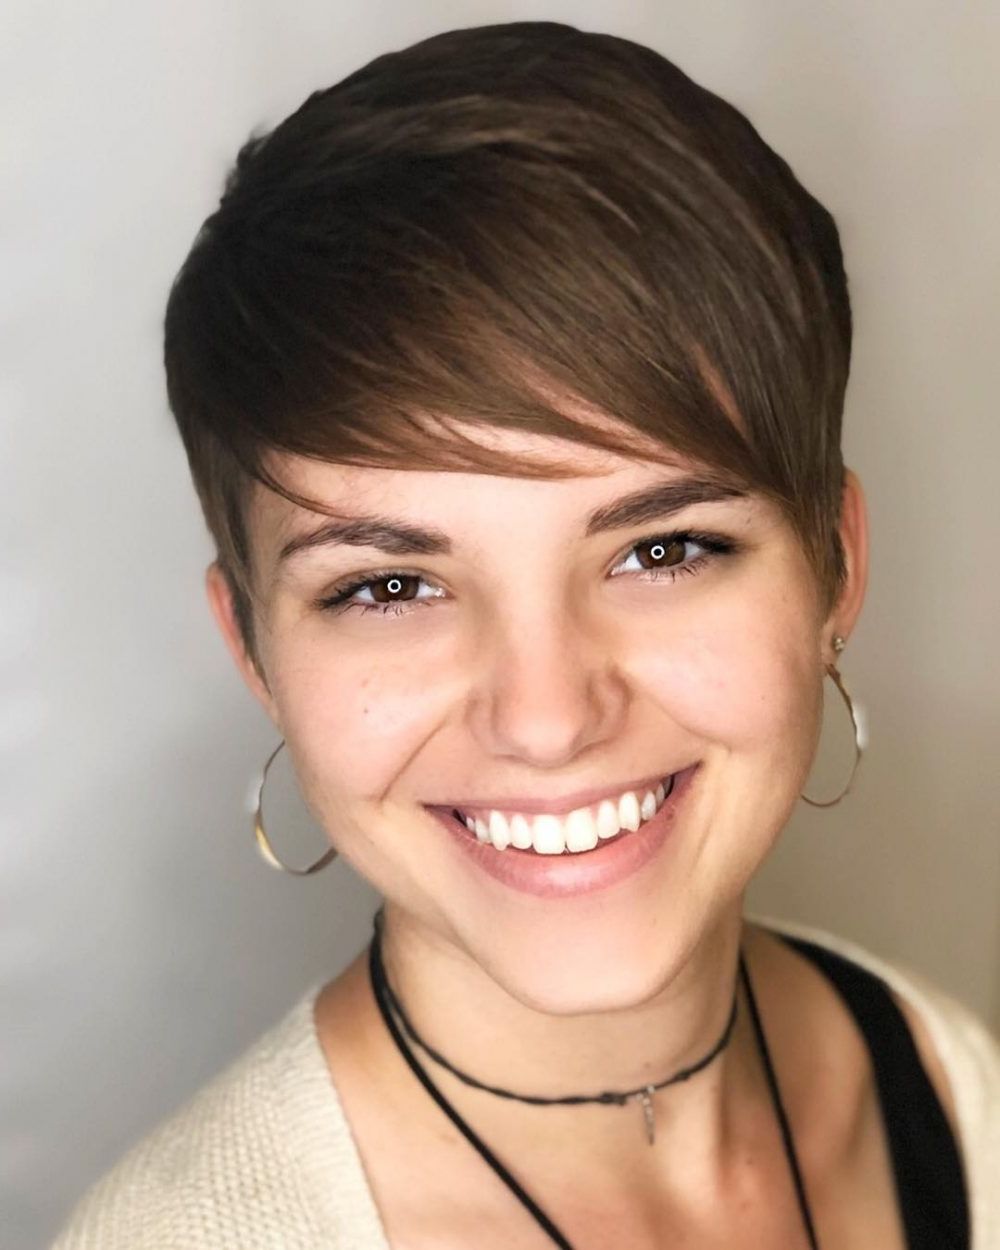 33 Flattering Short Hairstyles For Round Faces In 2018 Regarding Sexy Pixie Hairstyles With Rocker Texture (View 14 of 20)